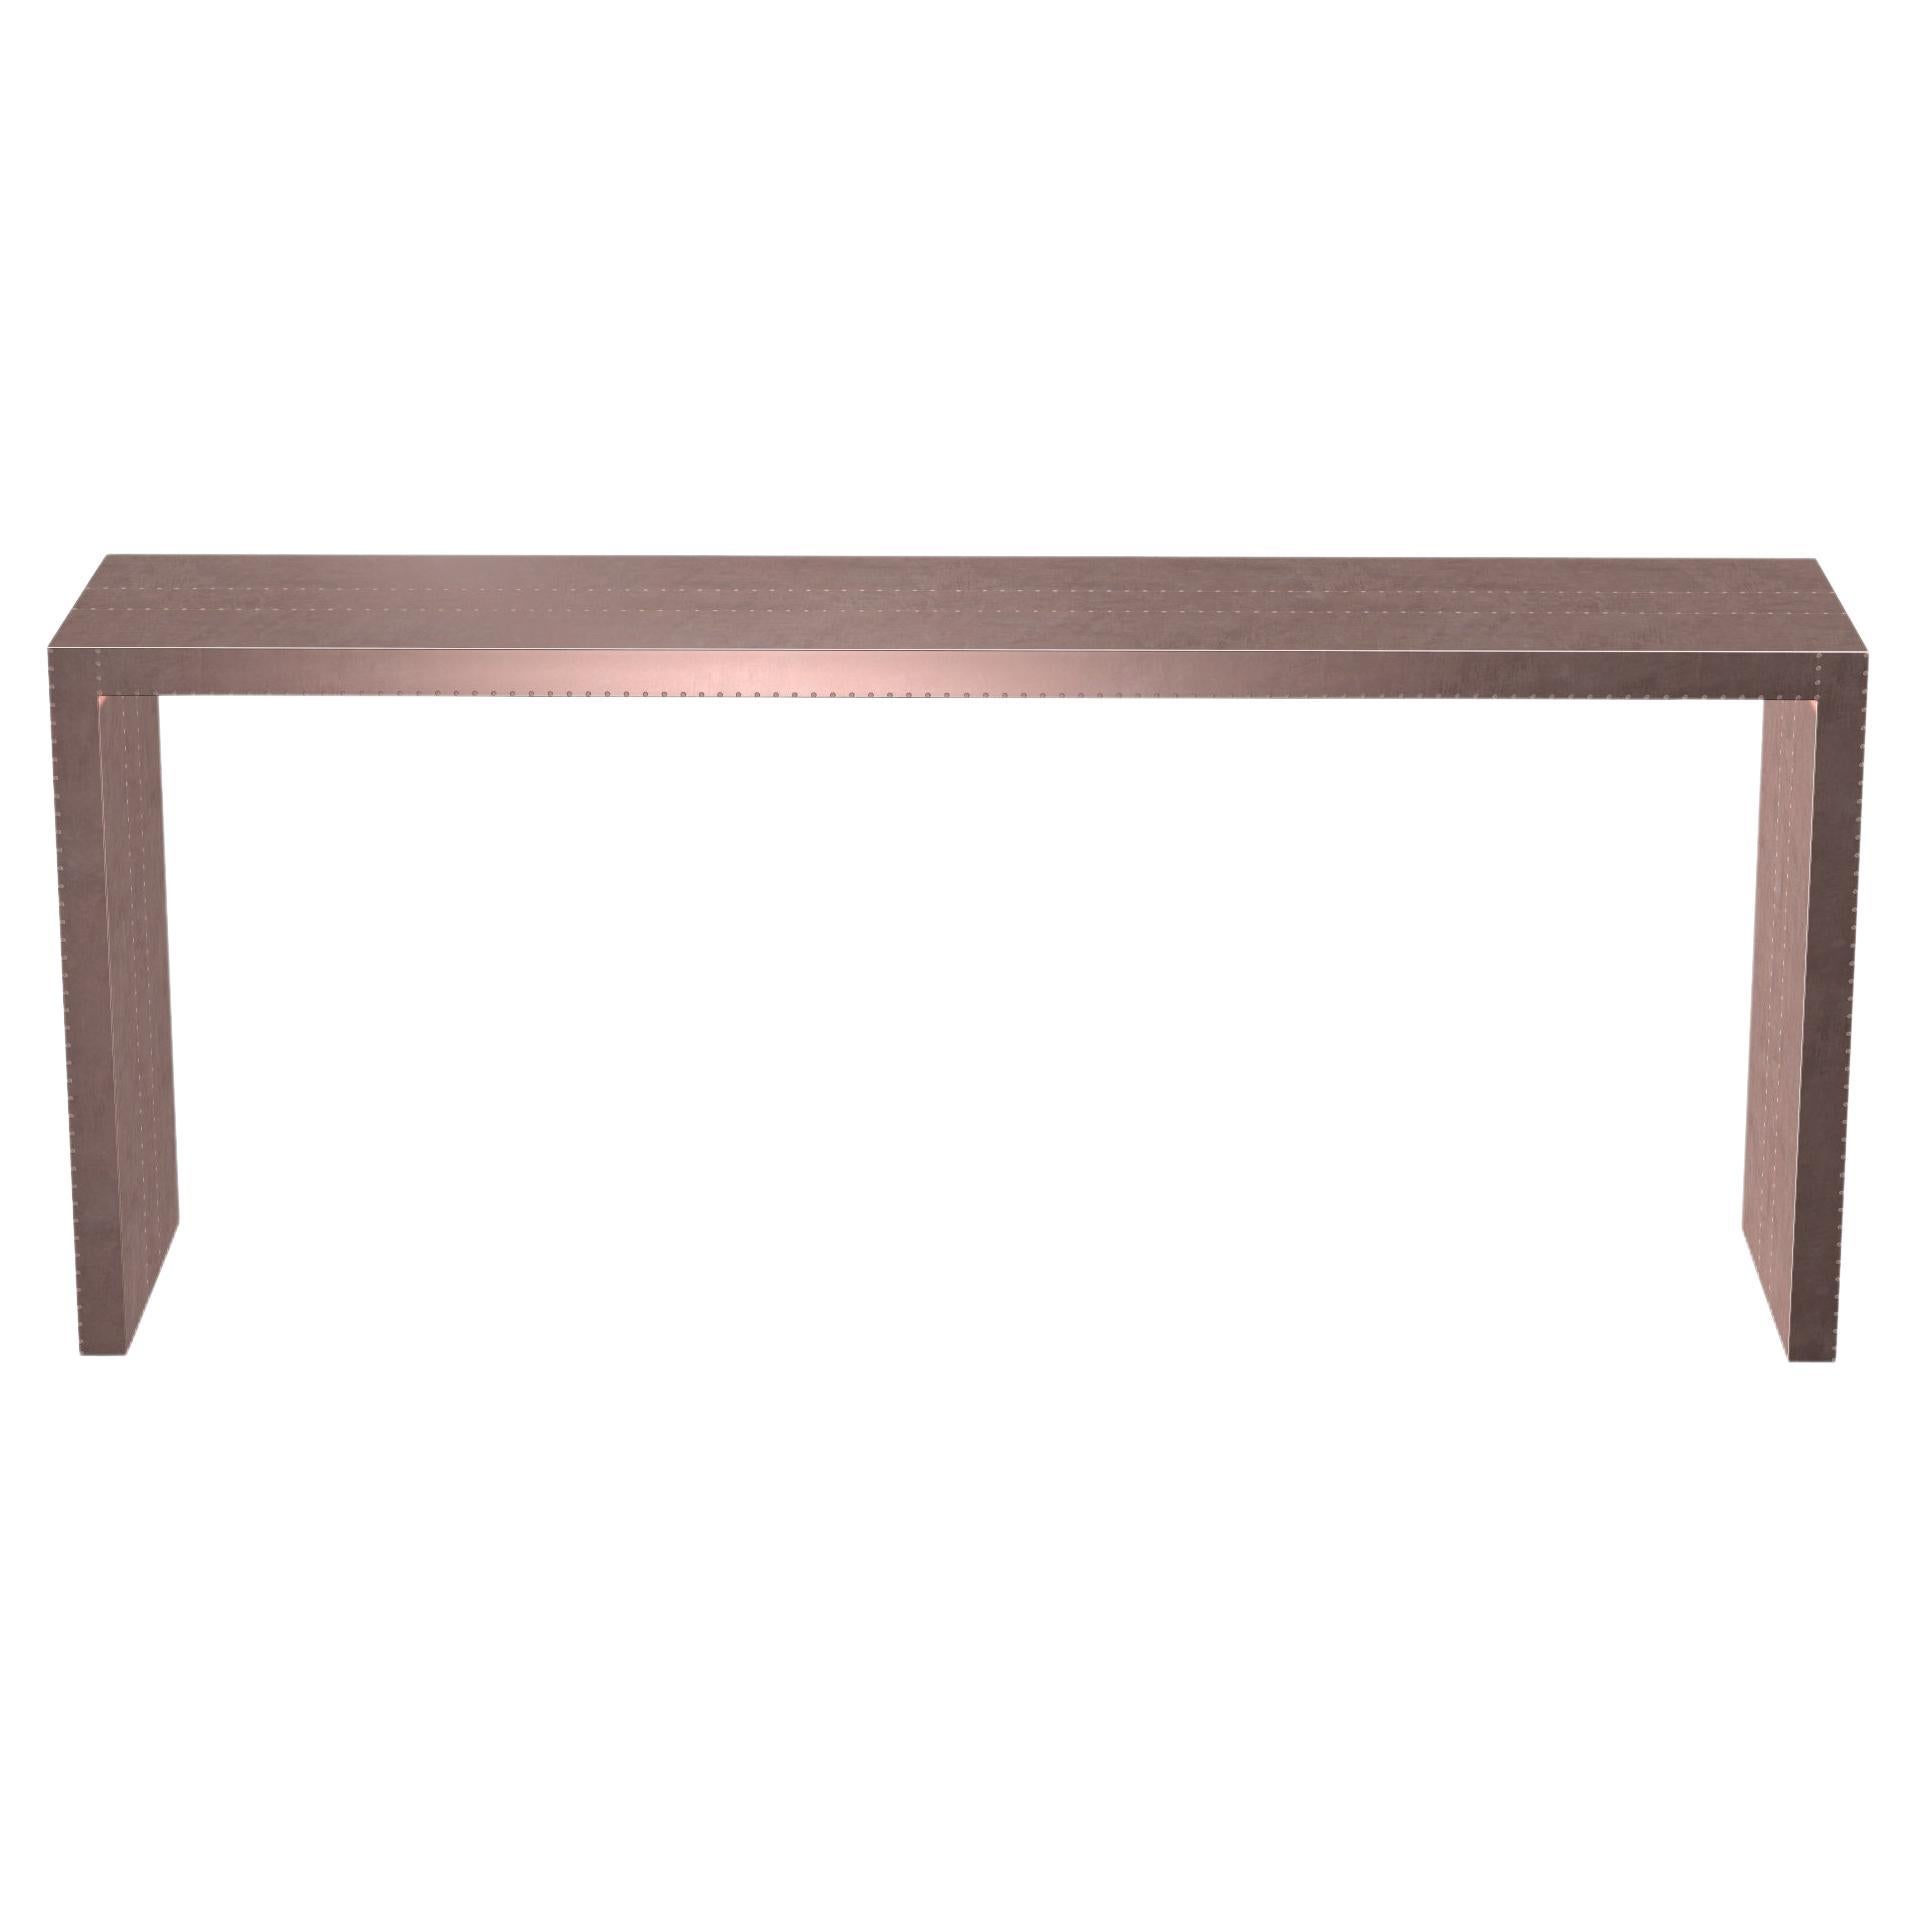 Art Deco Card Tables and Tea Tables Rectangular Console in Smooth Copper 